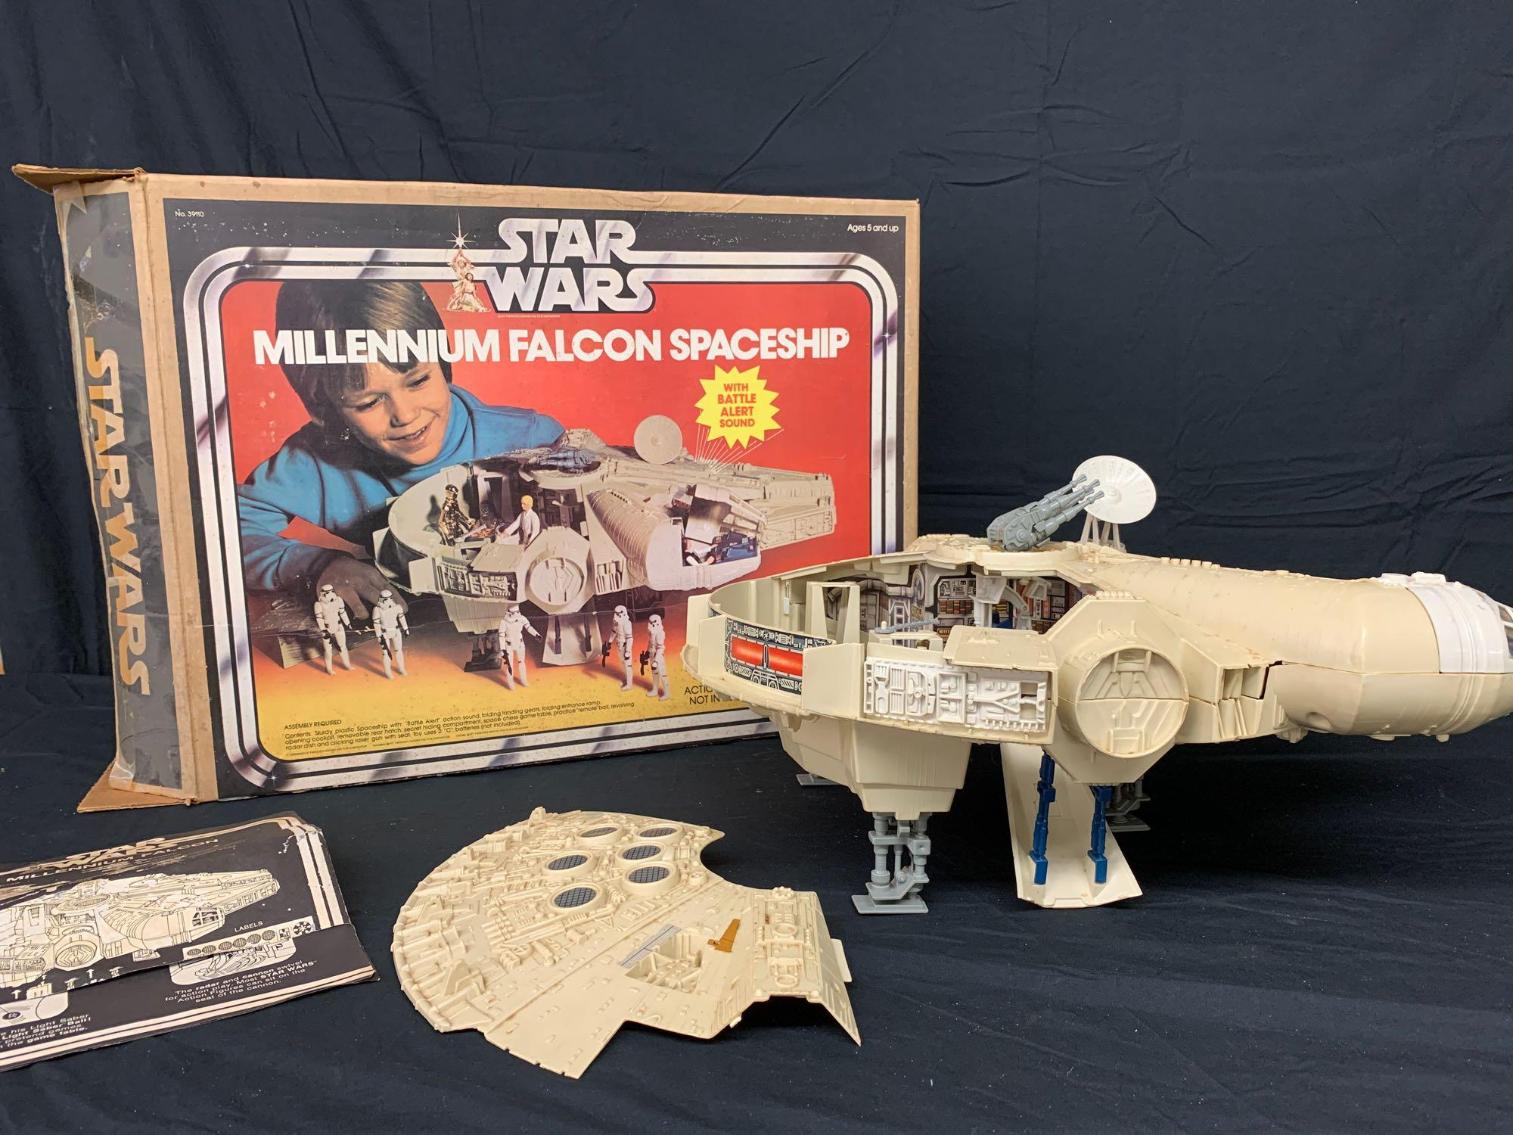 Star Wars/ Science Fiction Collectible Auction